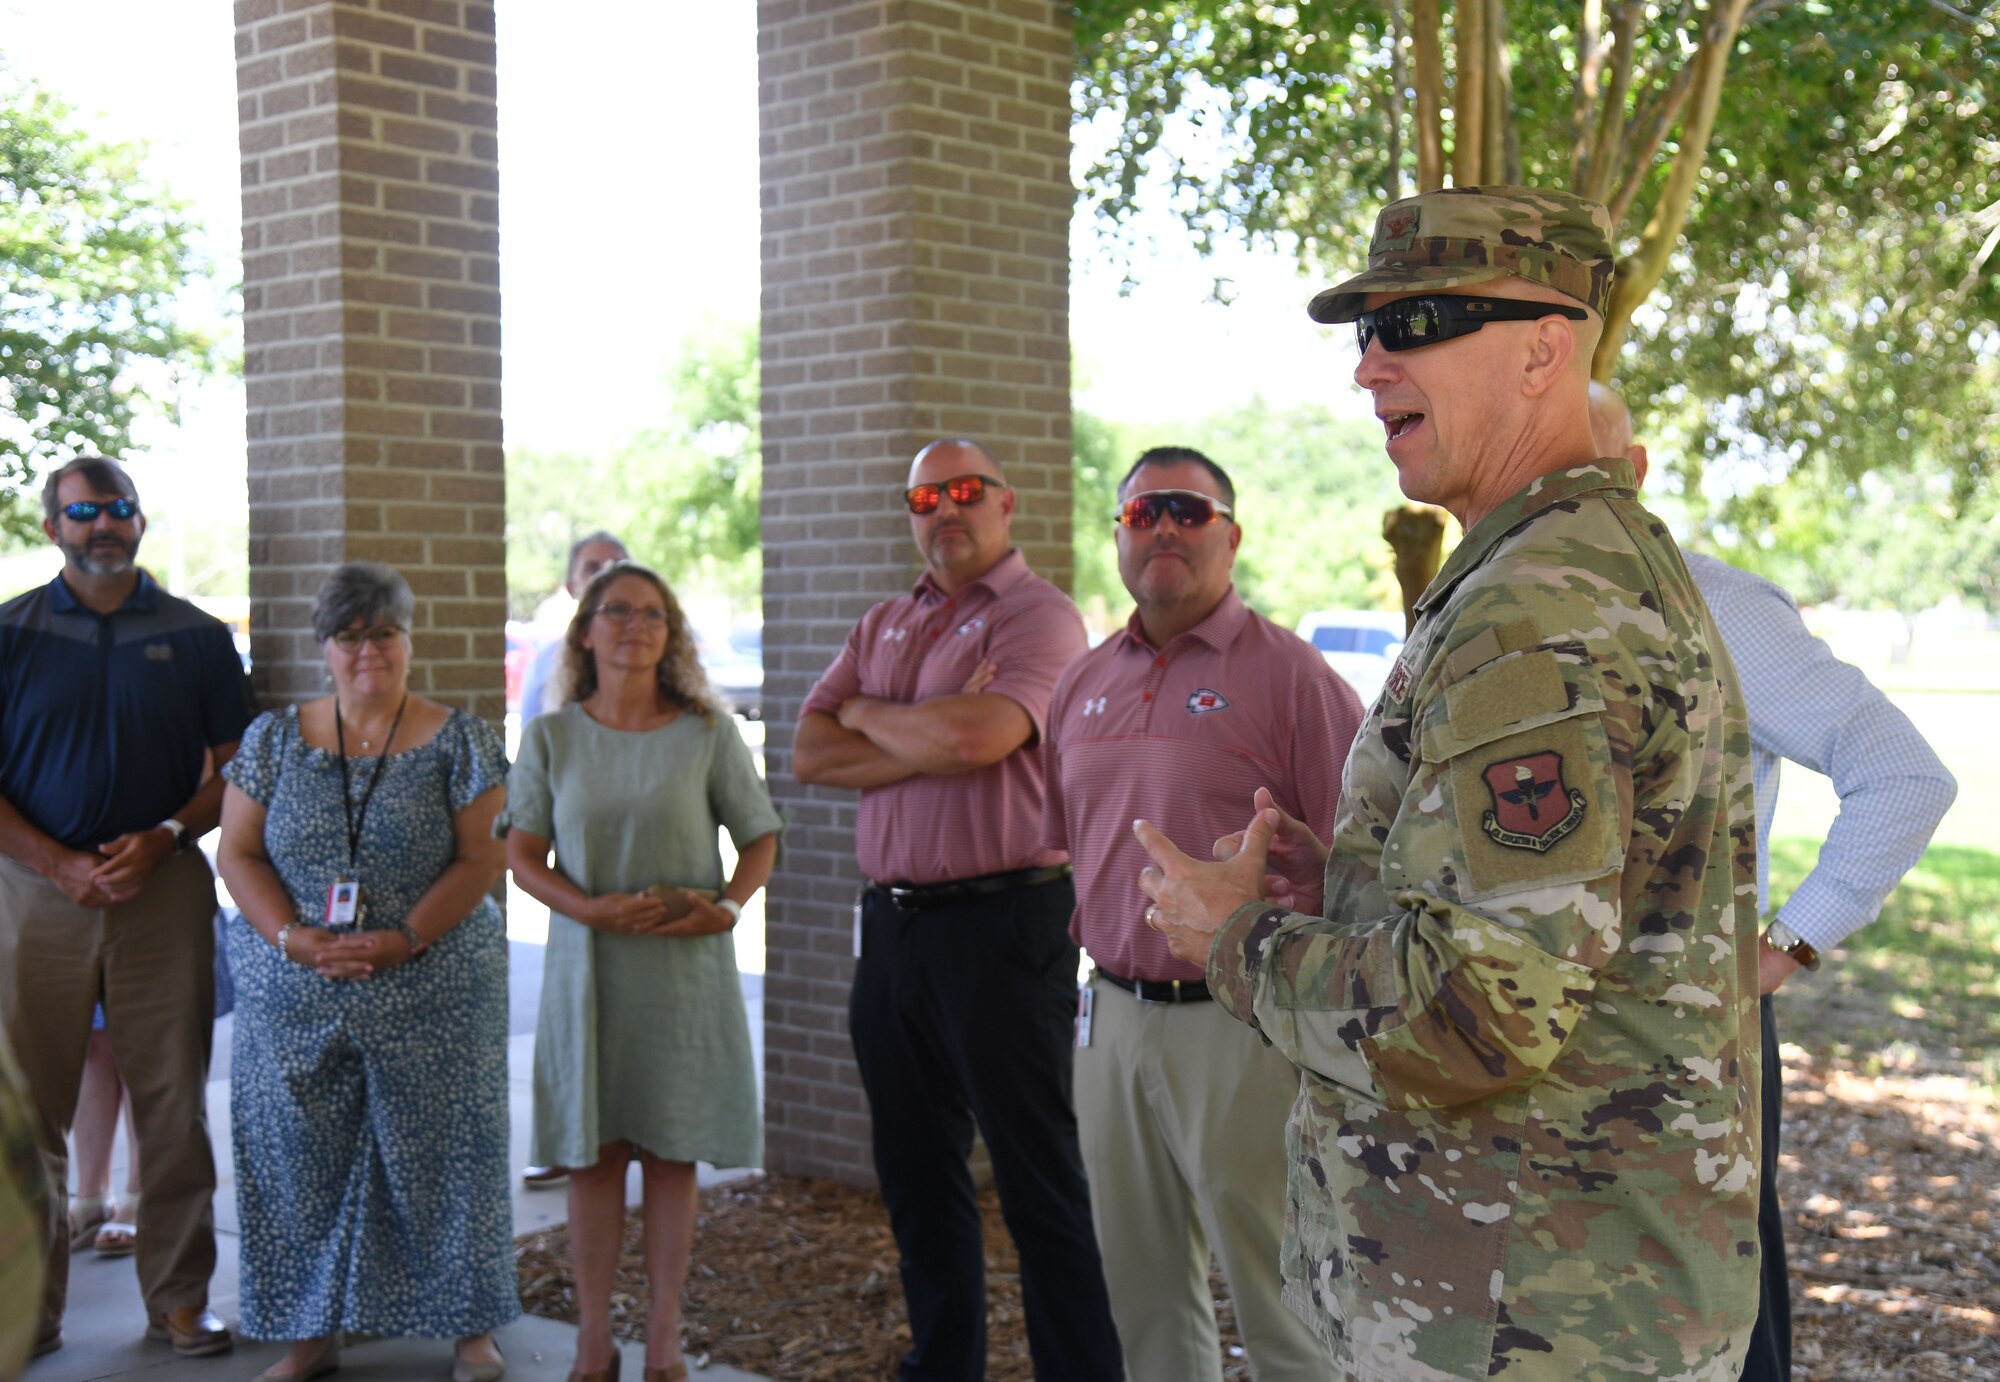 U.S. Air Force Col. William Hunter, 81st Training Wing commander, provides welcoming remarks to members of the Biloxi and Jackson County School Districts administration outside of the Bay Breeze Event Center at Keesler Air Force Base, Mississippi, July 7, 2022. The visit included tours of the student dorms and the weather and air traffic control training courses. (U.S. Air Force photo by Kemberly Groue)